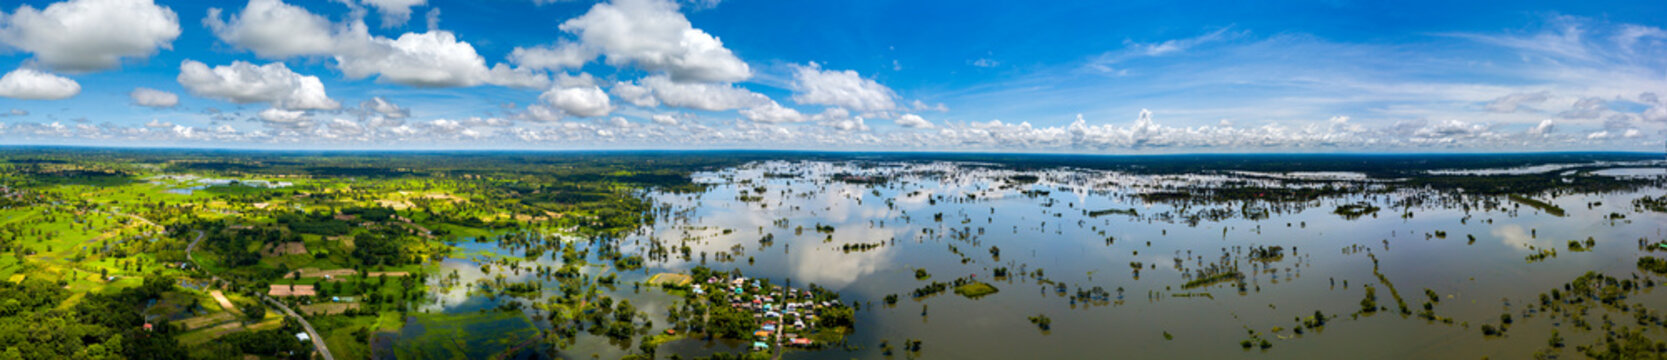 Panorama Top view Aerial photo from flying drone.Flooded rice paddies.Flooding the fields with water in which rice sown by natural calamity. View from above rice fields and green forest,Thailand,Asia.